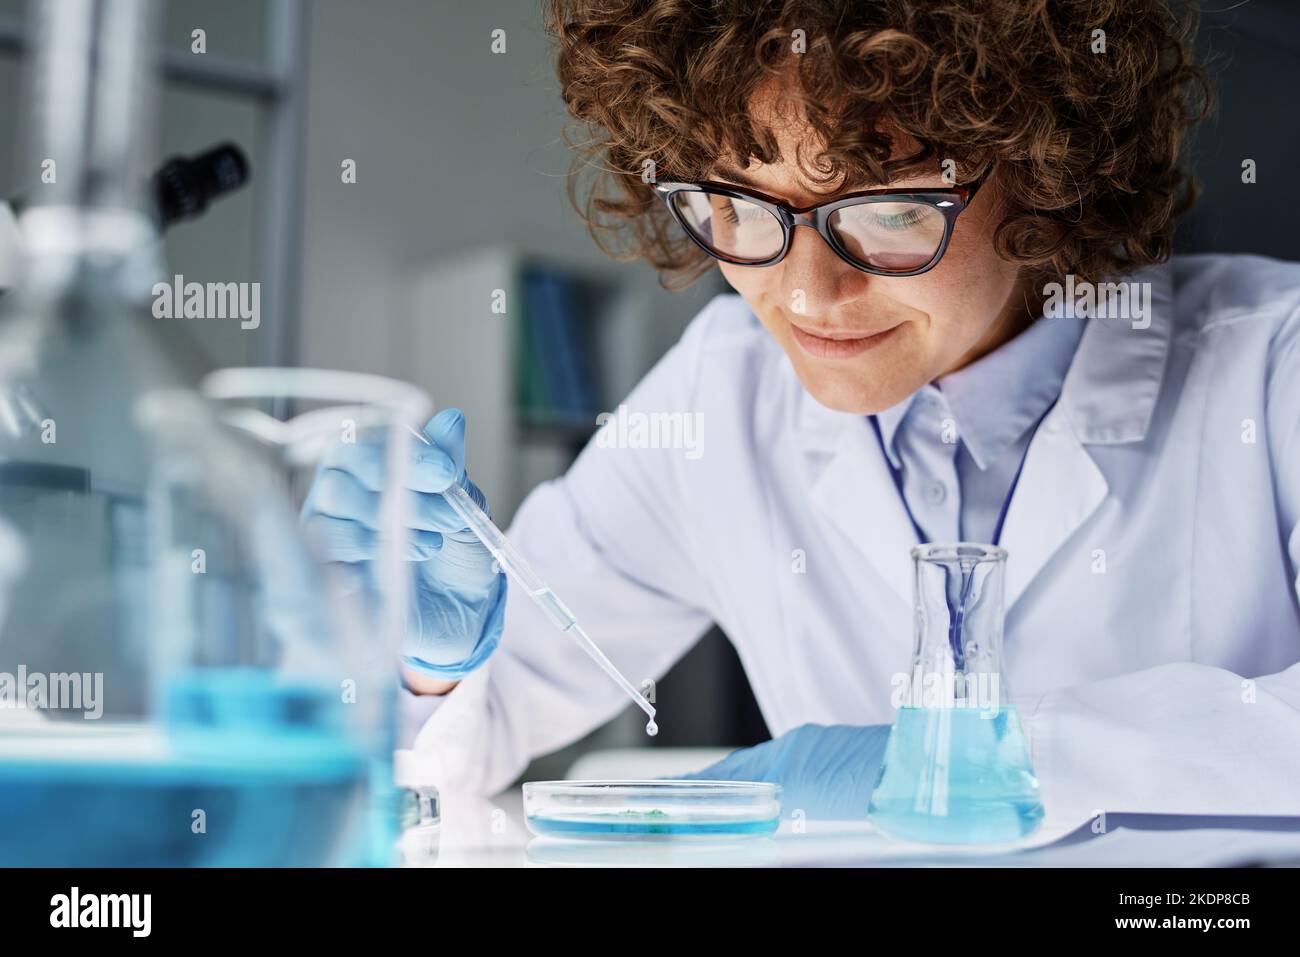 Young female scientist or chemist in labcoat, gloves and eyeglasses dropping liquid substance into petri dish by workplace Stock Photo